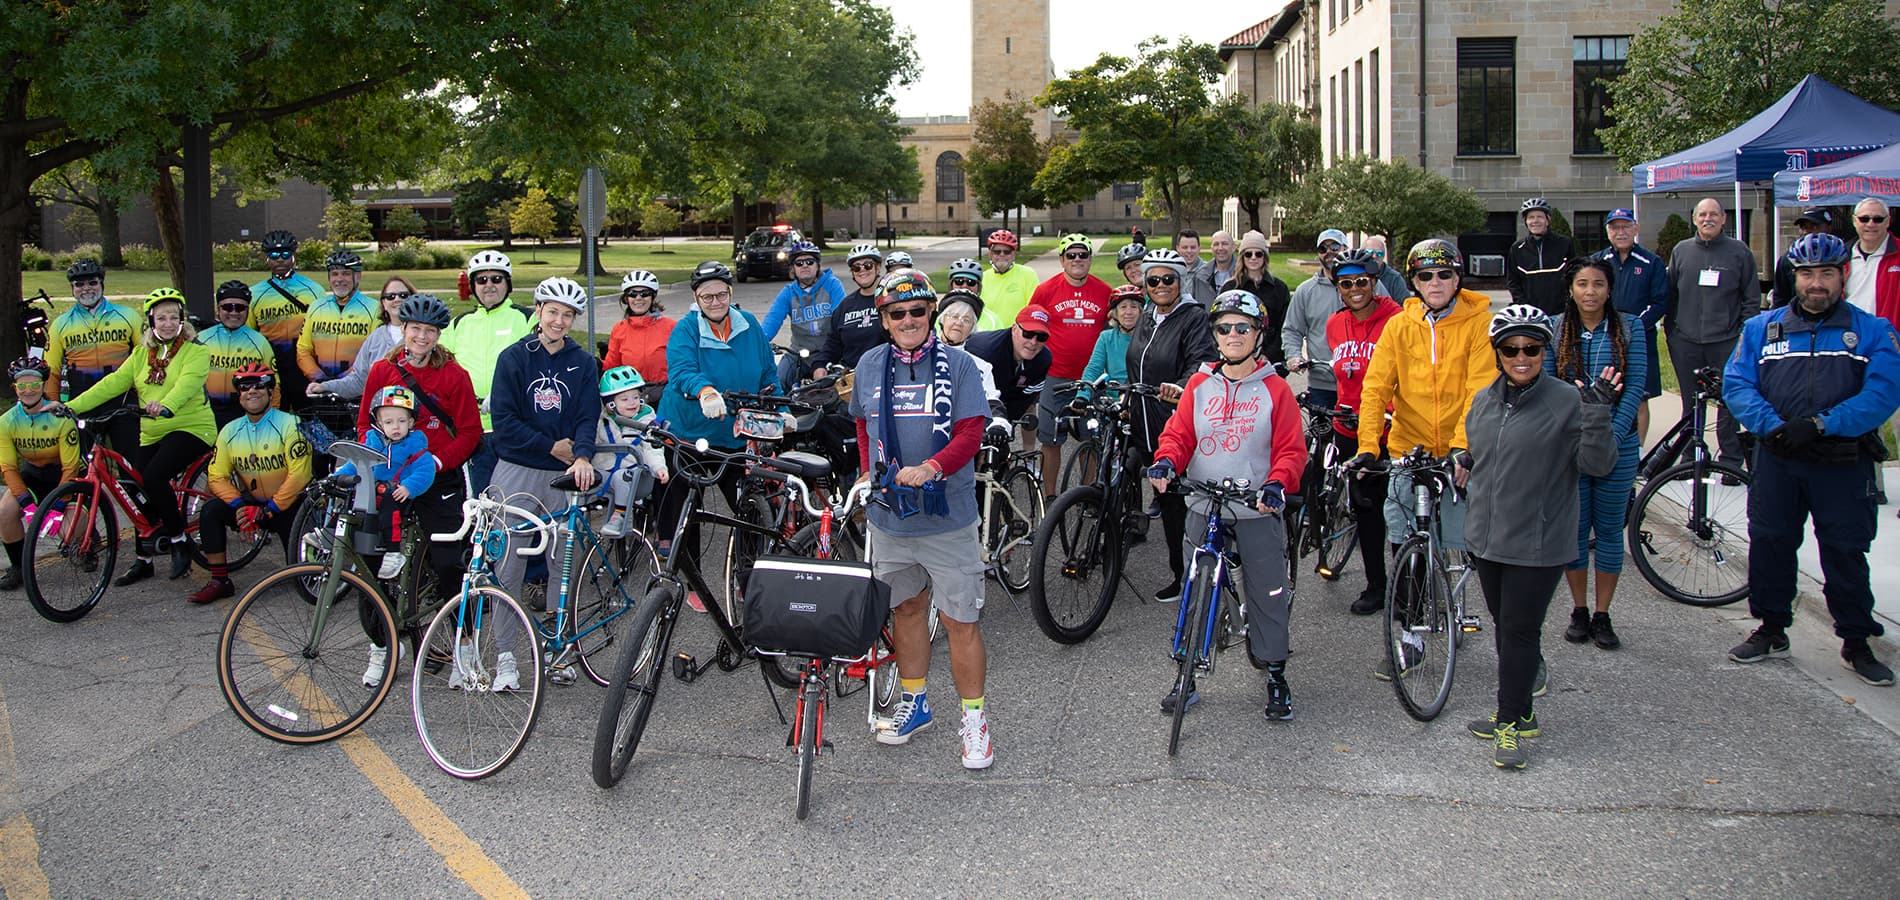 More than three dozen people, many with bikes stand outside in front of buildings, trees and a clock tower.